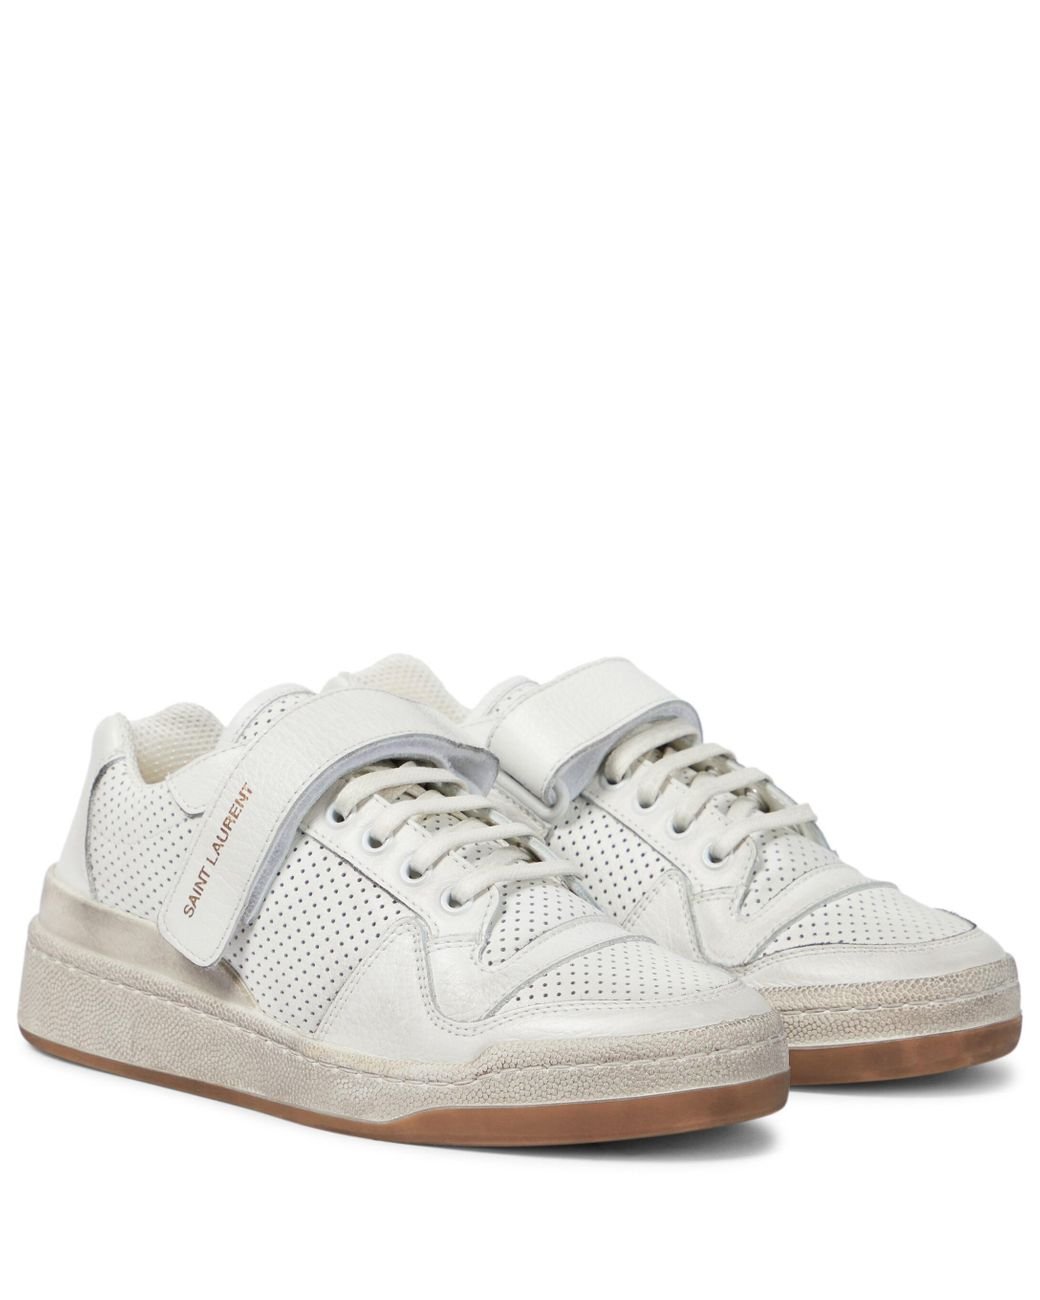 Saint Laurent Sl24 Leather Sneakers in White - Lyst